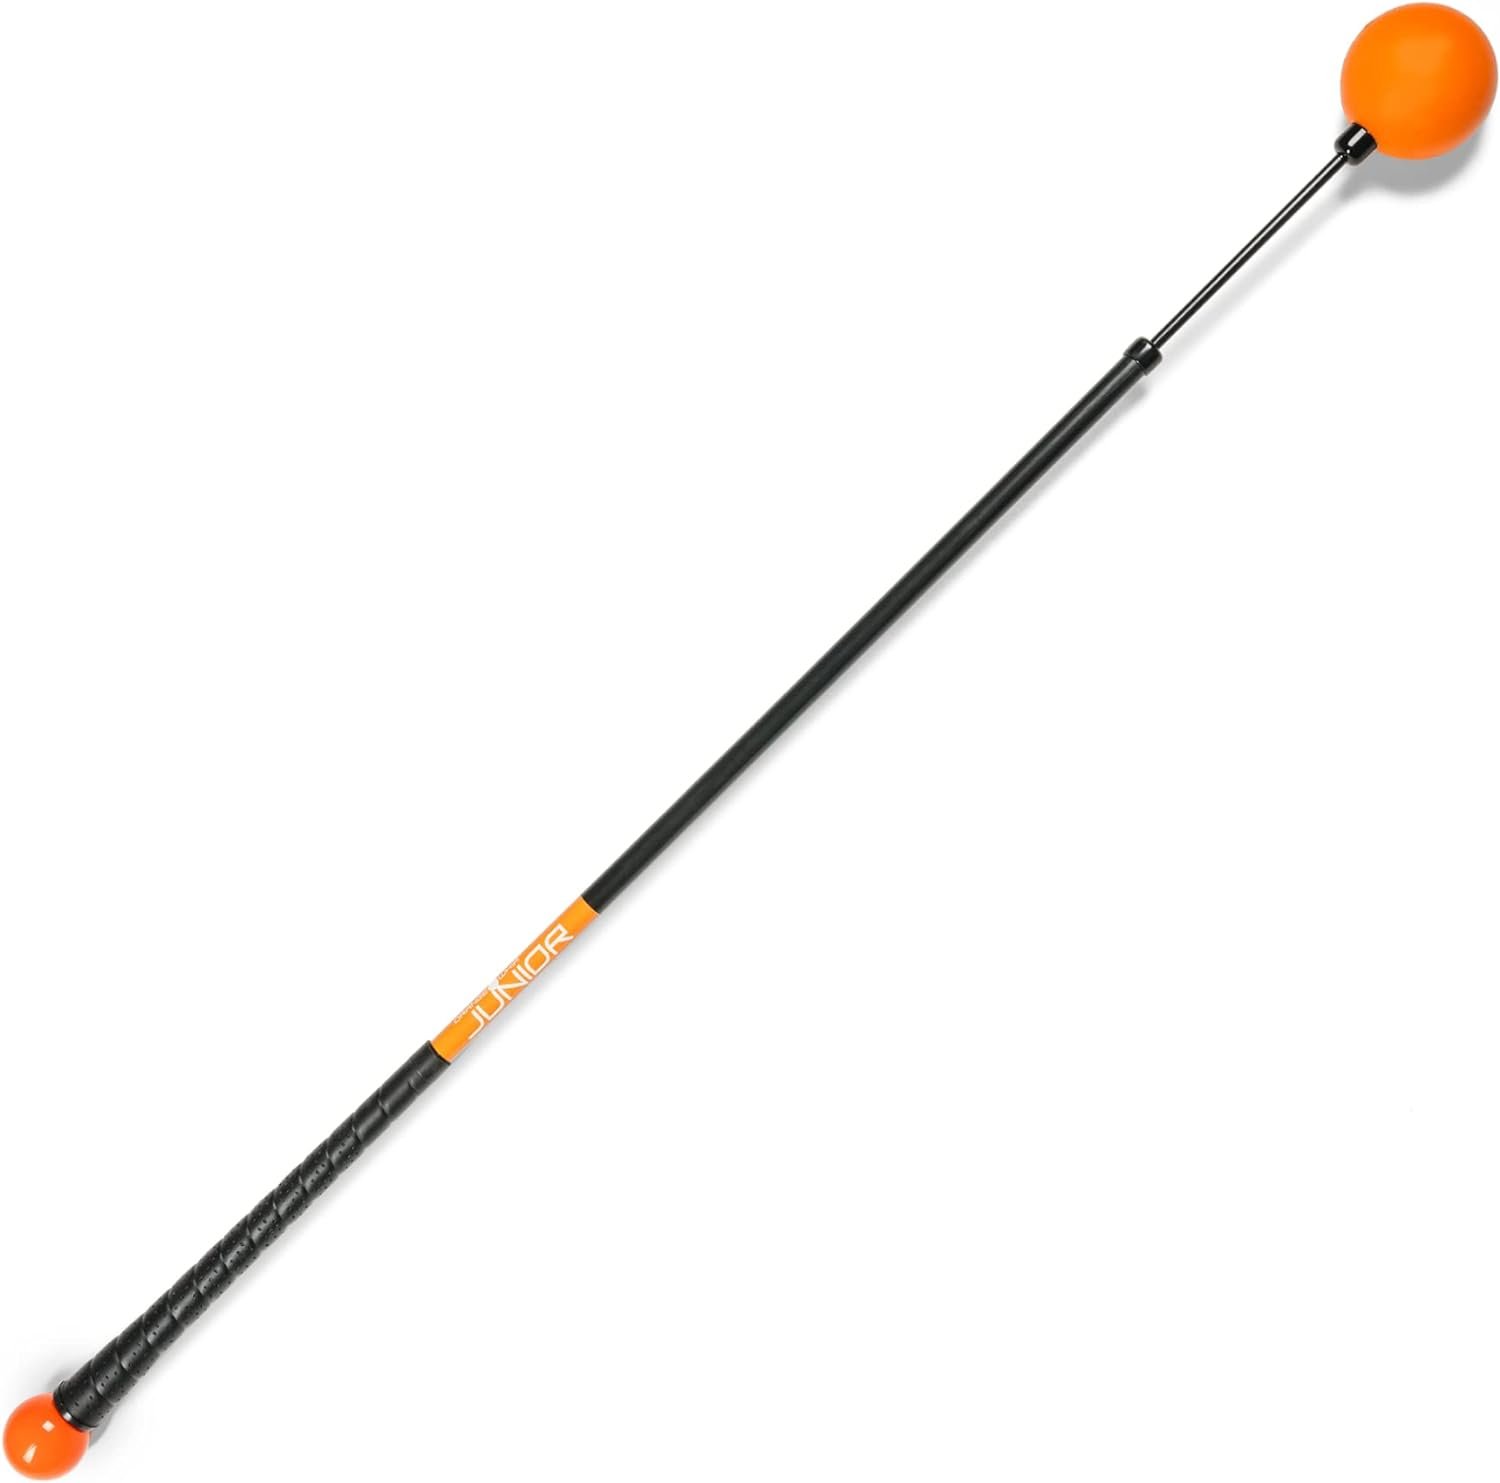 Orange Whip Golf Swing Trainer Aid Patented  Made in USA for Improved Rhythm, Flexibility, Balance, Tempo, and Strength *American Made*